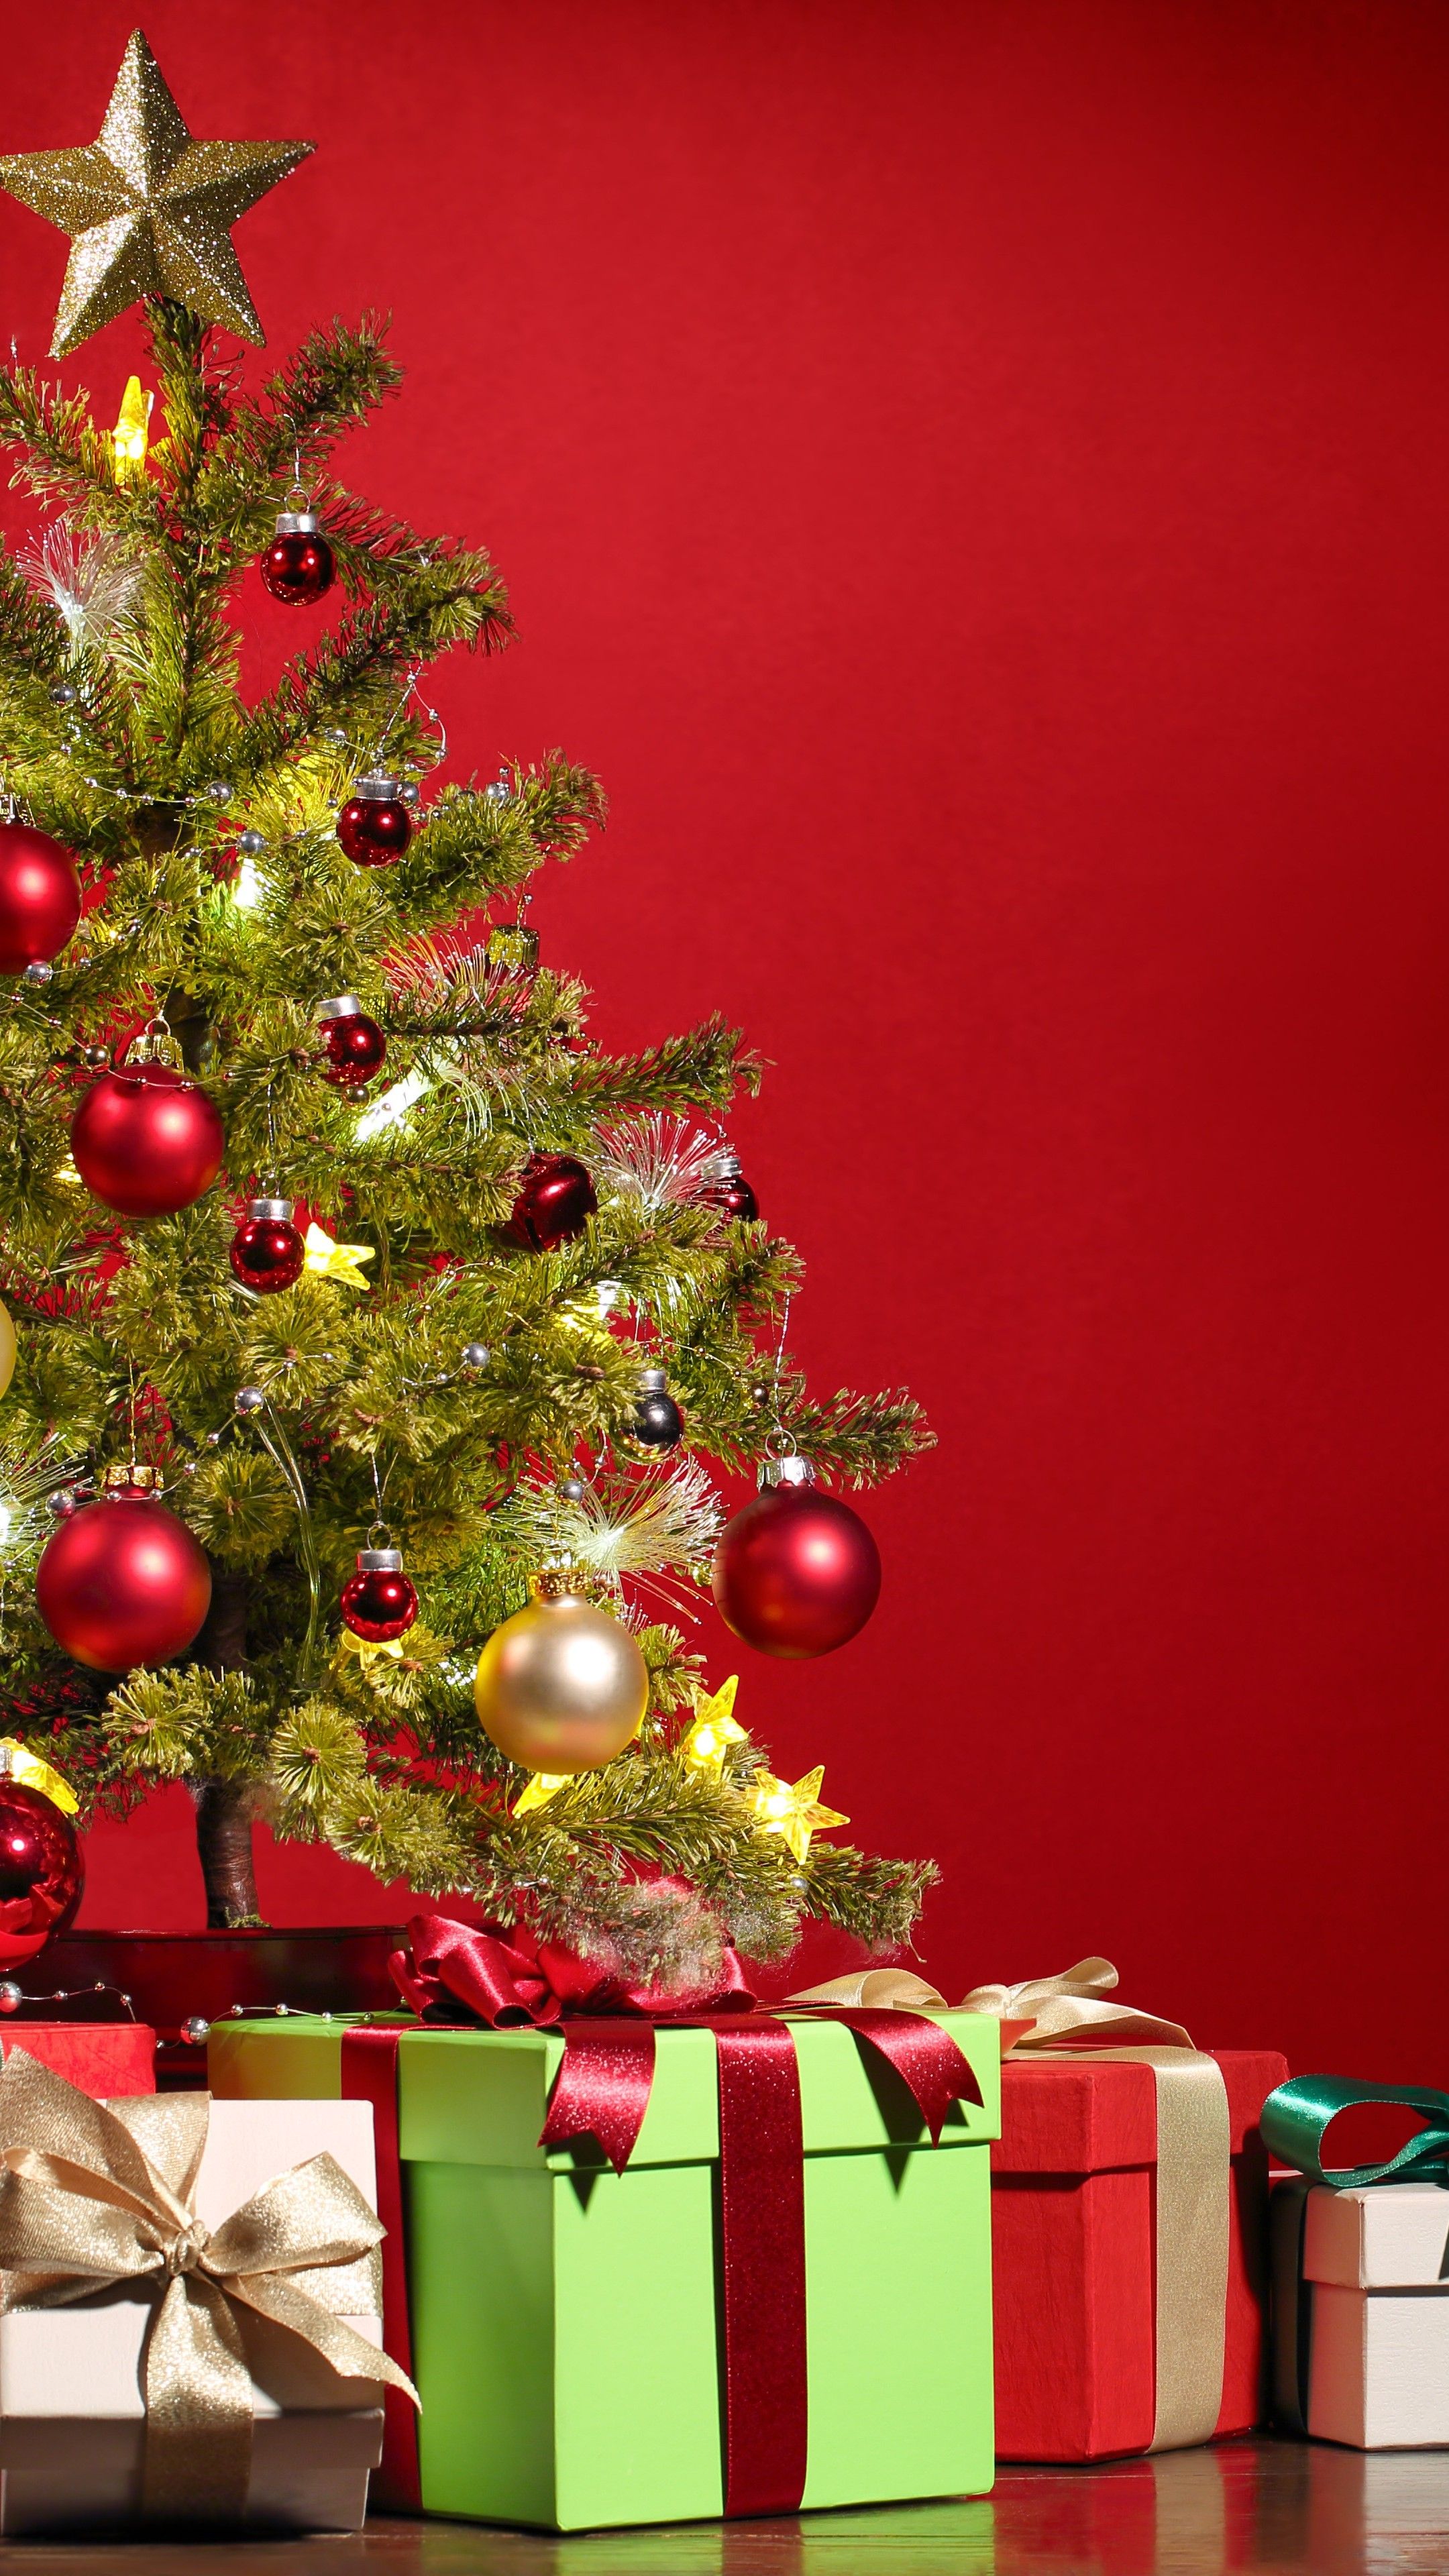 Wallpaper Christmas, New Year, Gifts, Fir Tree, Red, 5k, Holidays